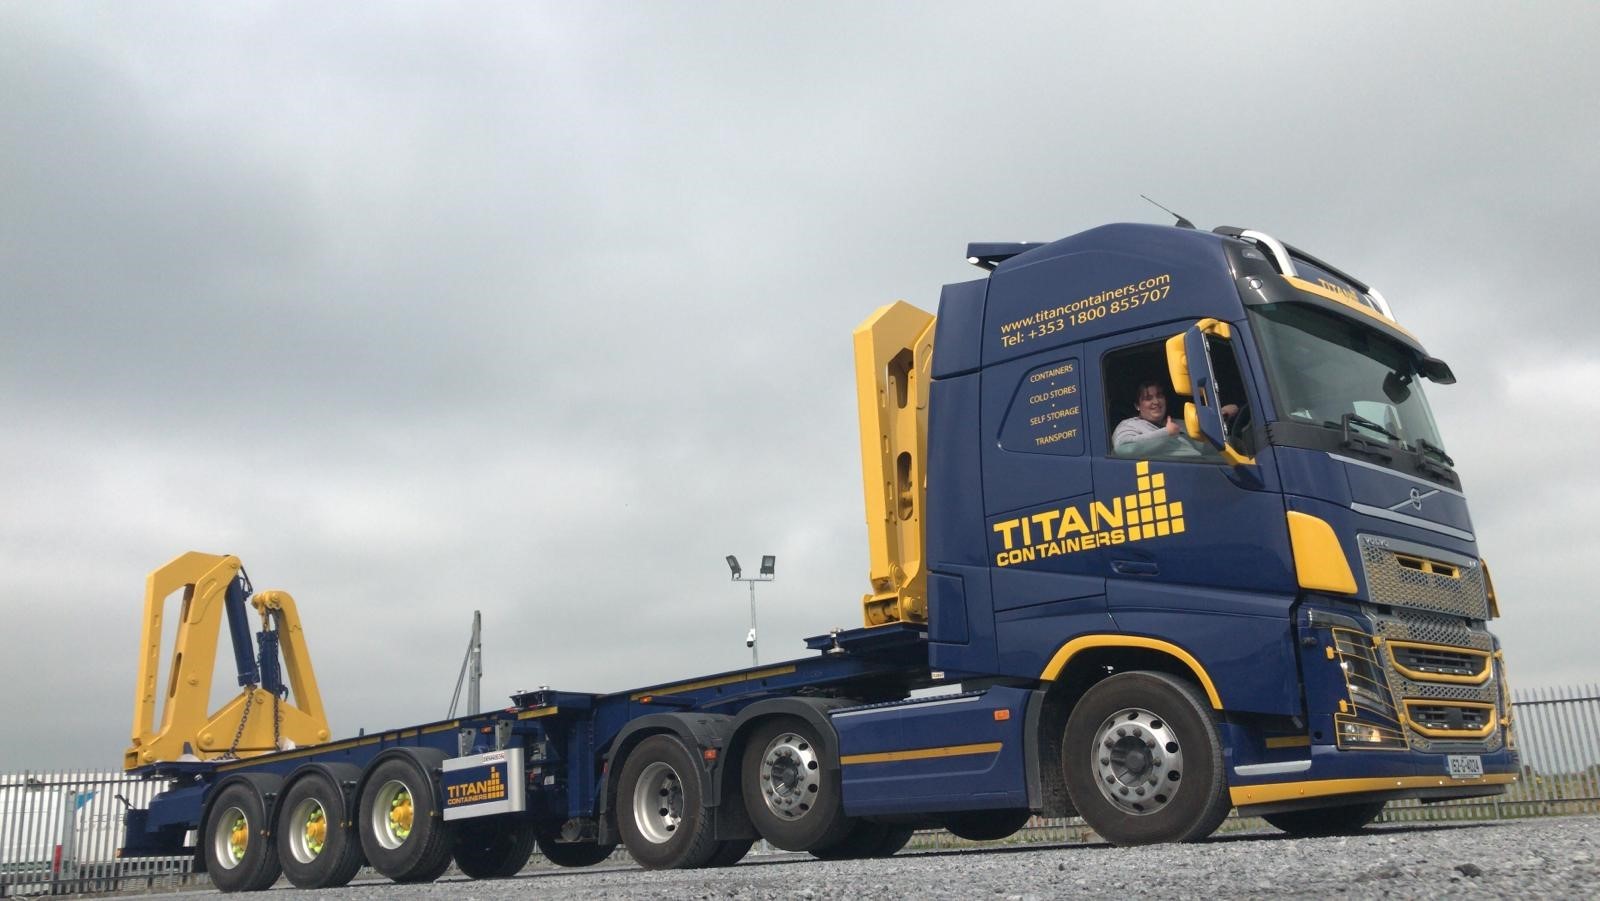 Midlands Container Depot acquired by TITAN